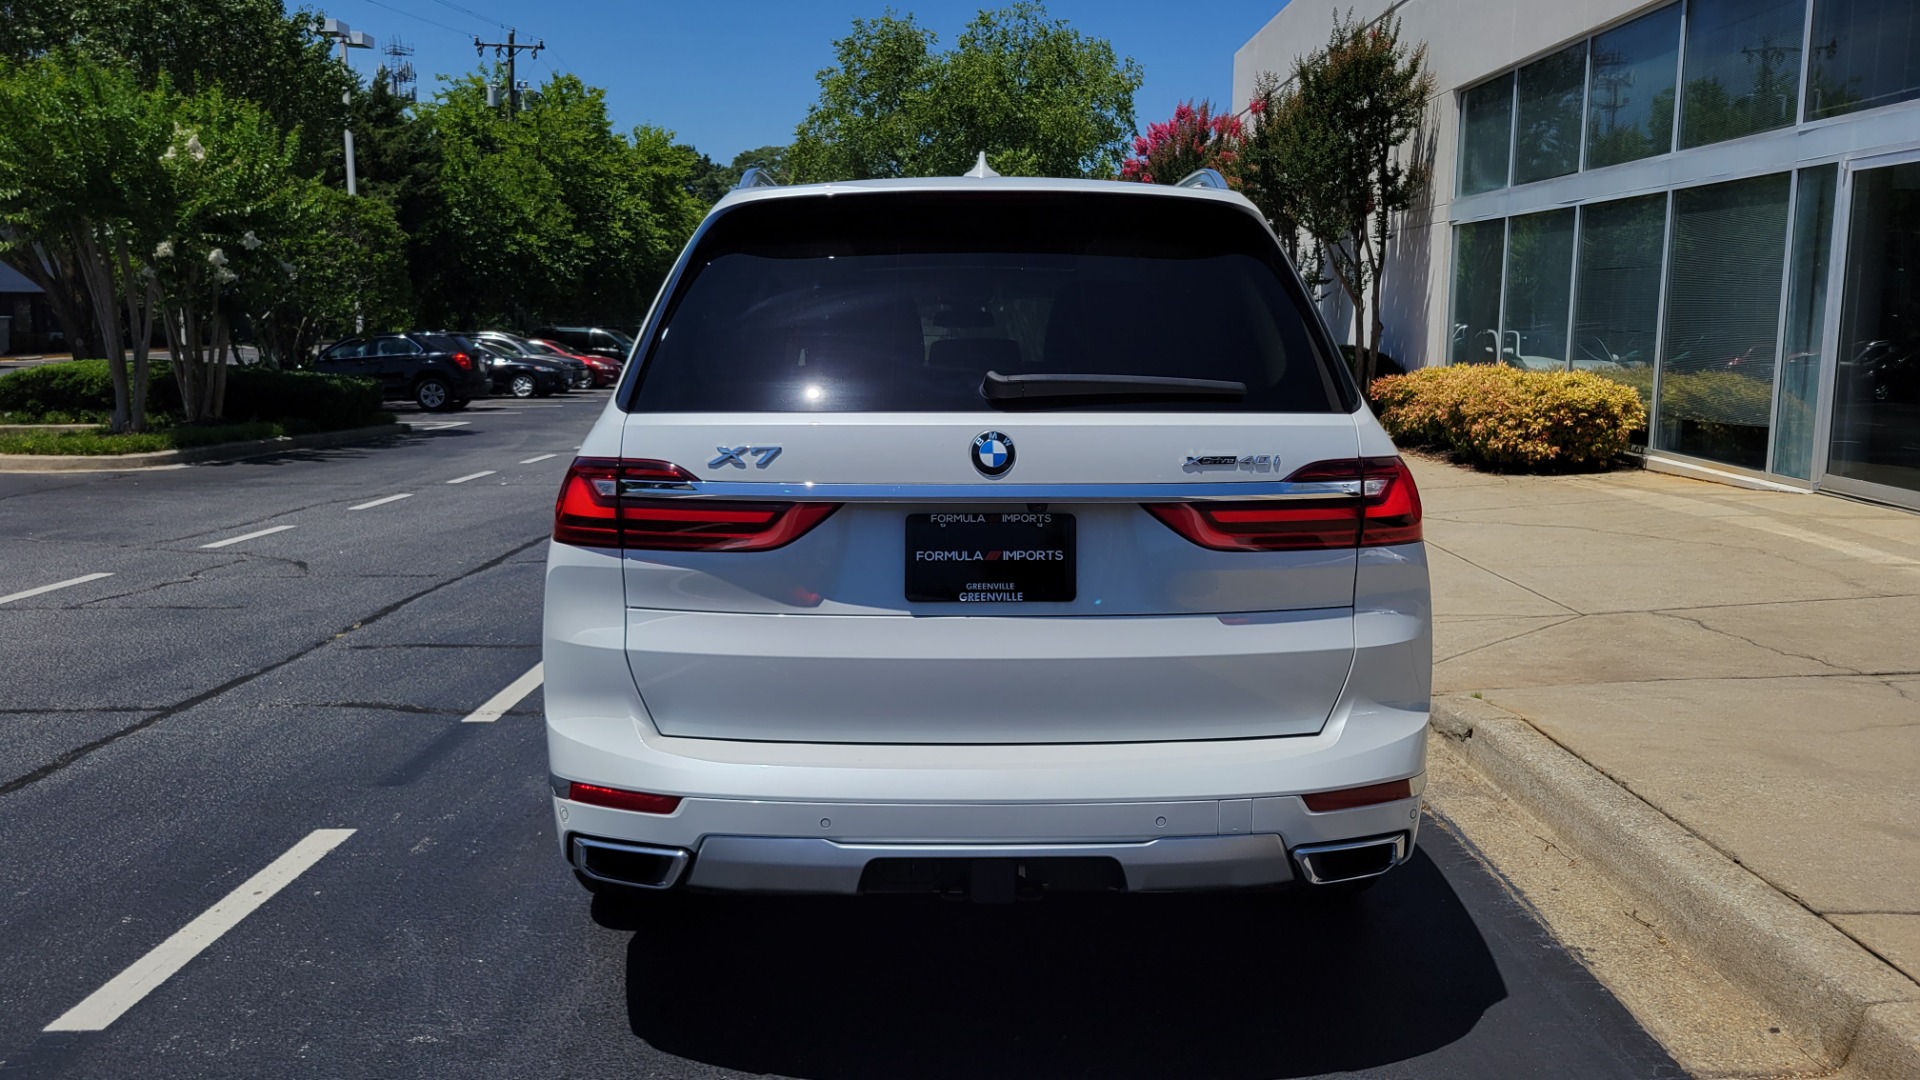 Used 2019 BMW X7 XDRIVE40I PREMIUM / NAV / HUD / PARK ASST PLUS / REMOTE START / 3D VIEW for sale $68,995 at Formula Imports in Charlotte NC 28227 9